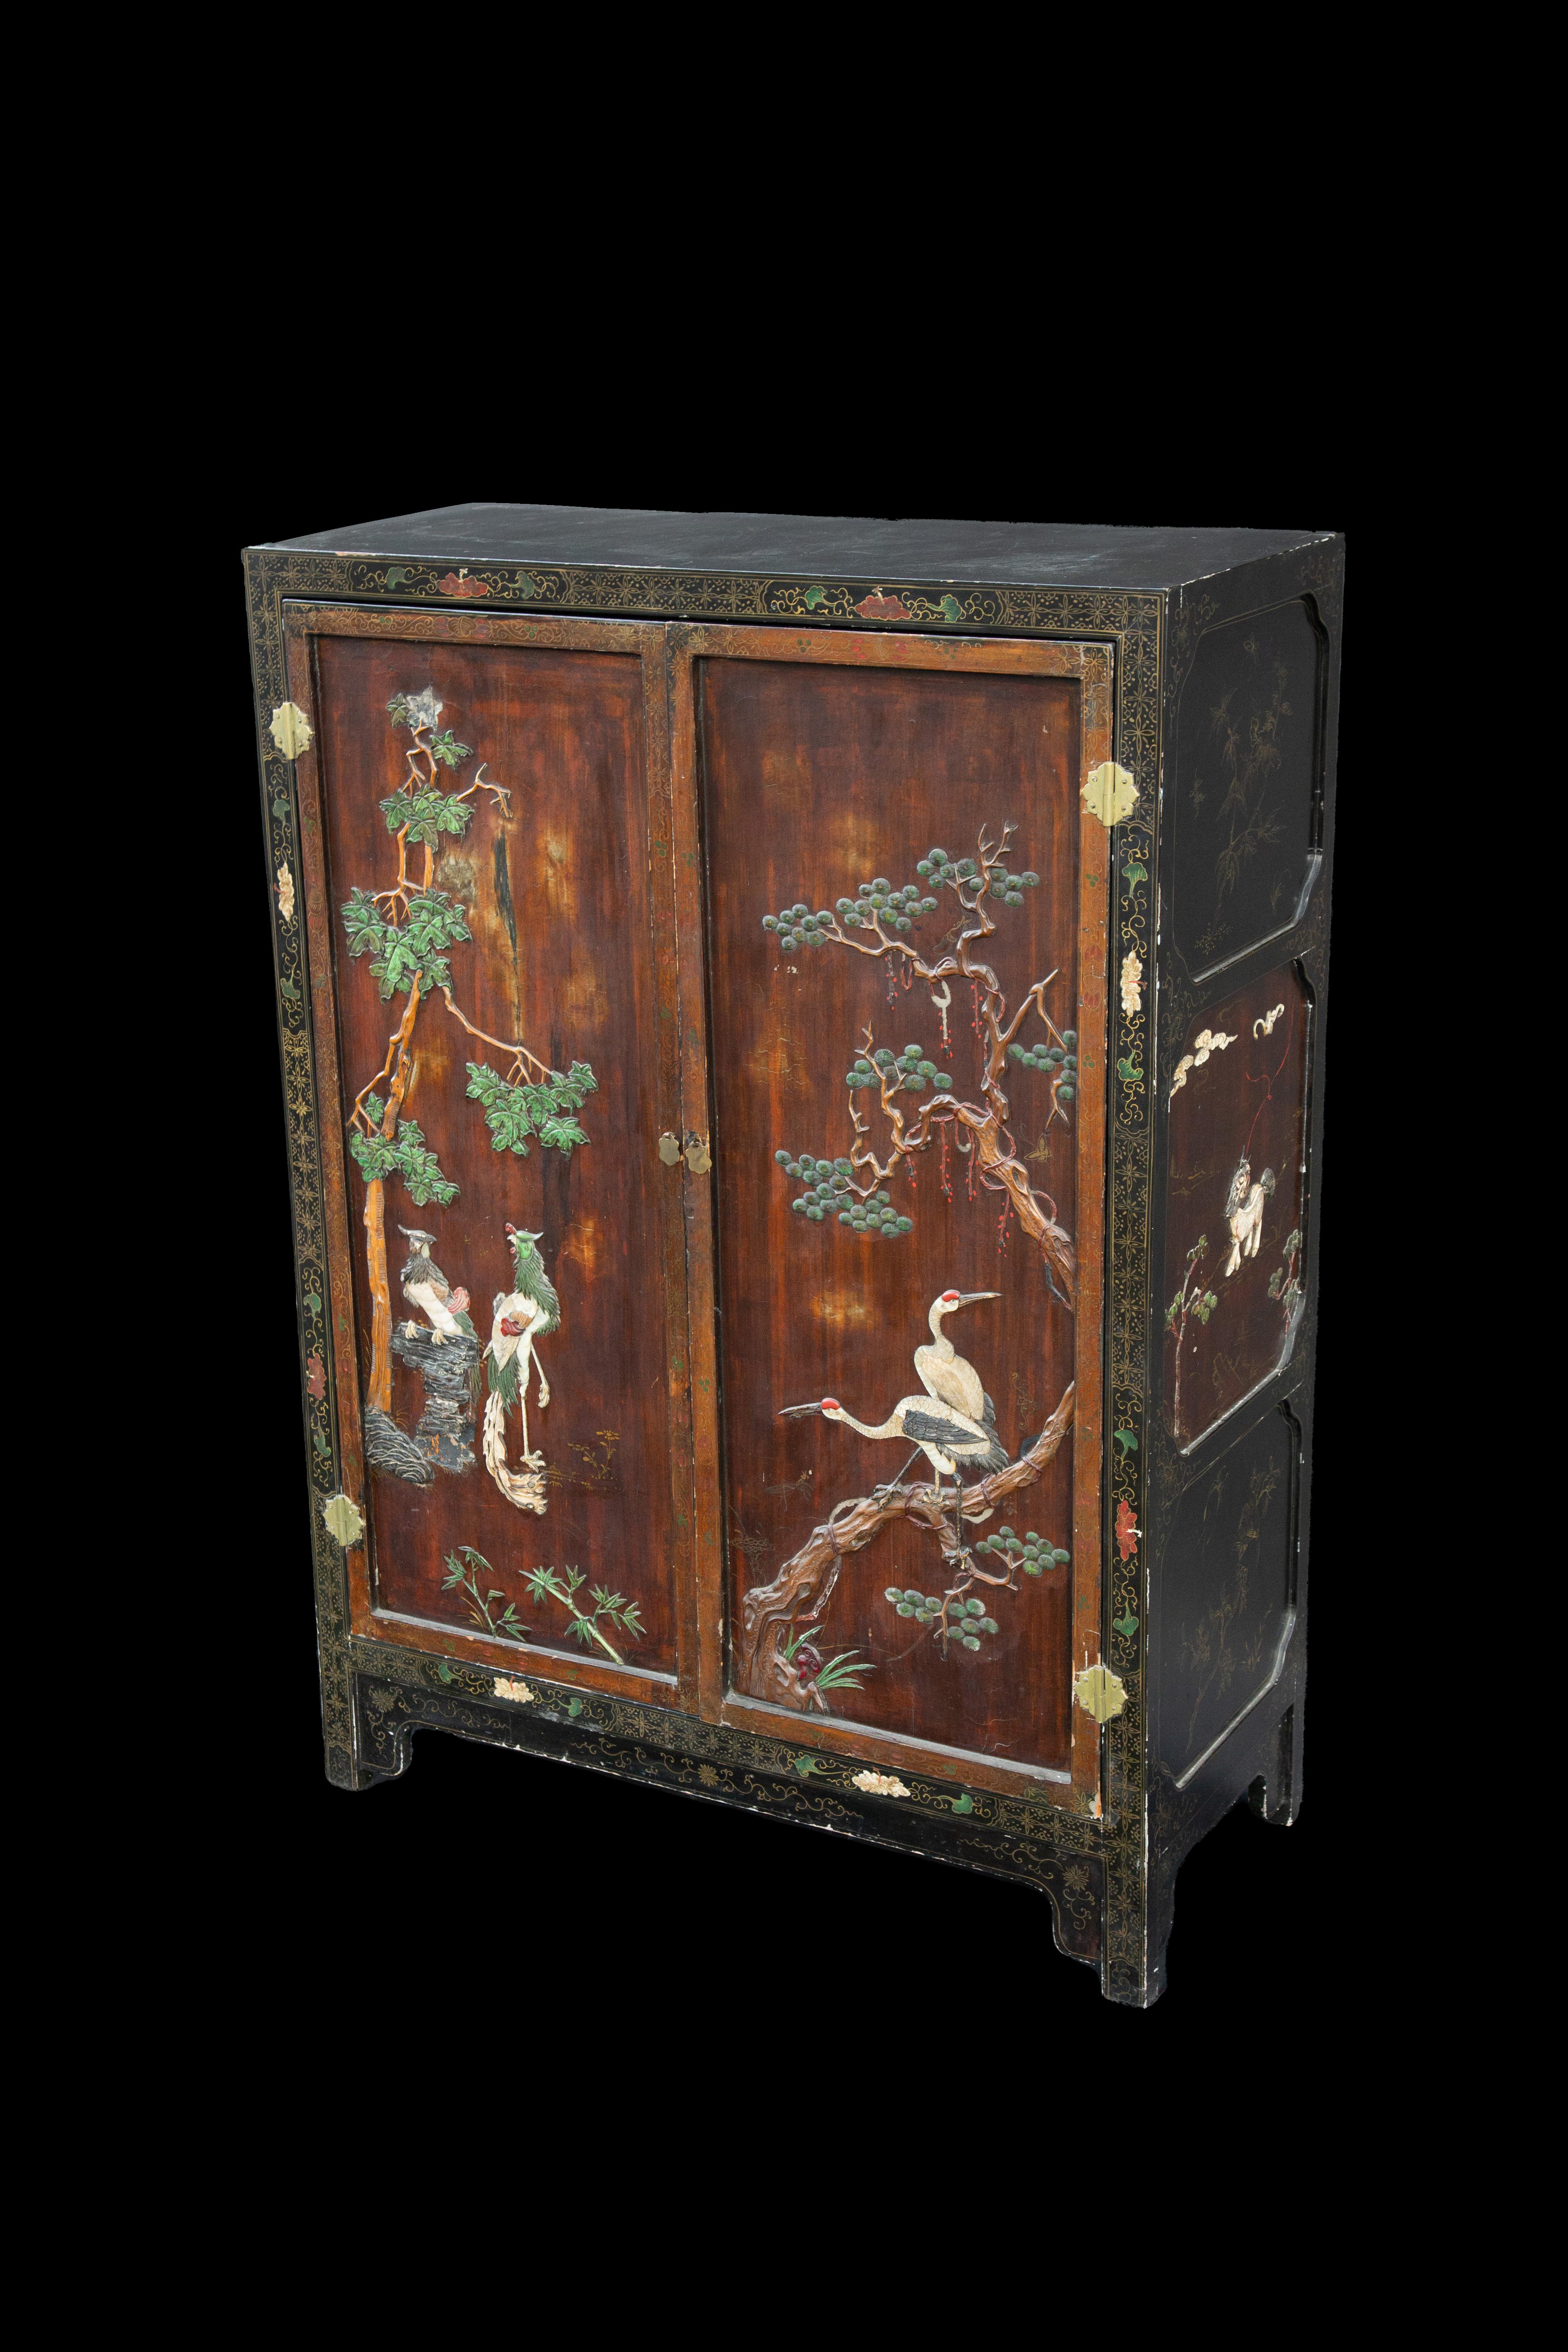 Chinese Export 19th Century Chinese Armoire Decorated with High Relief Flora and Fauna 57.75